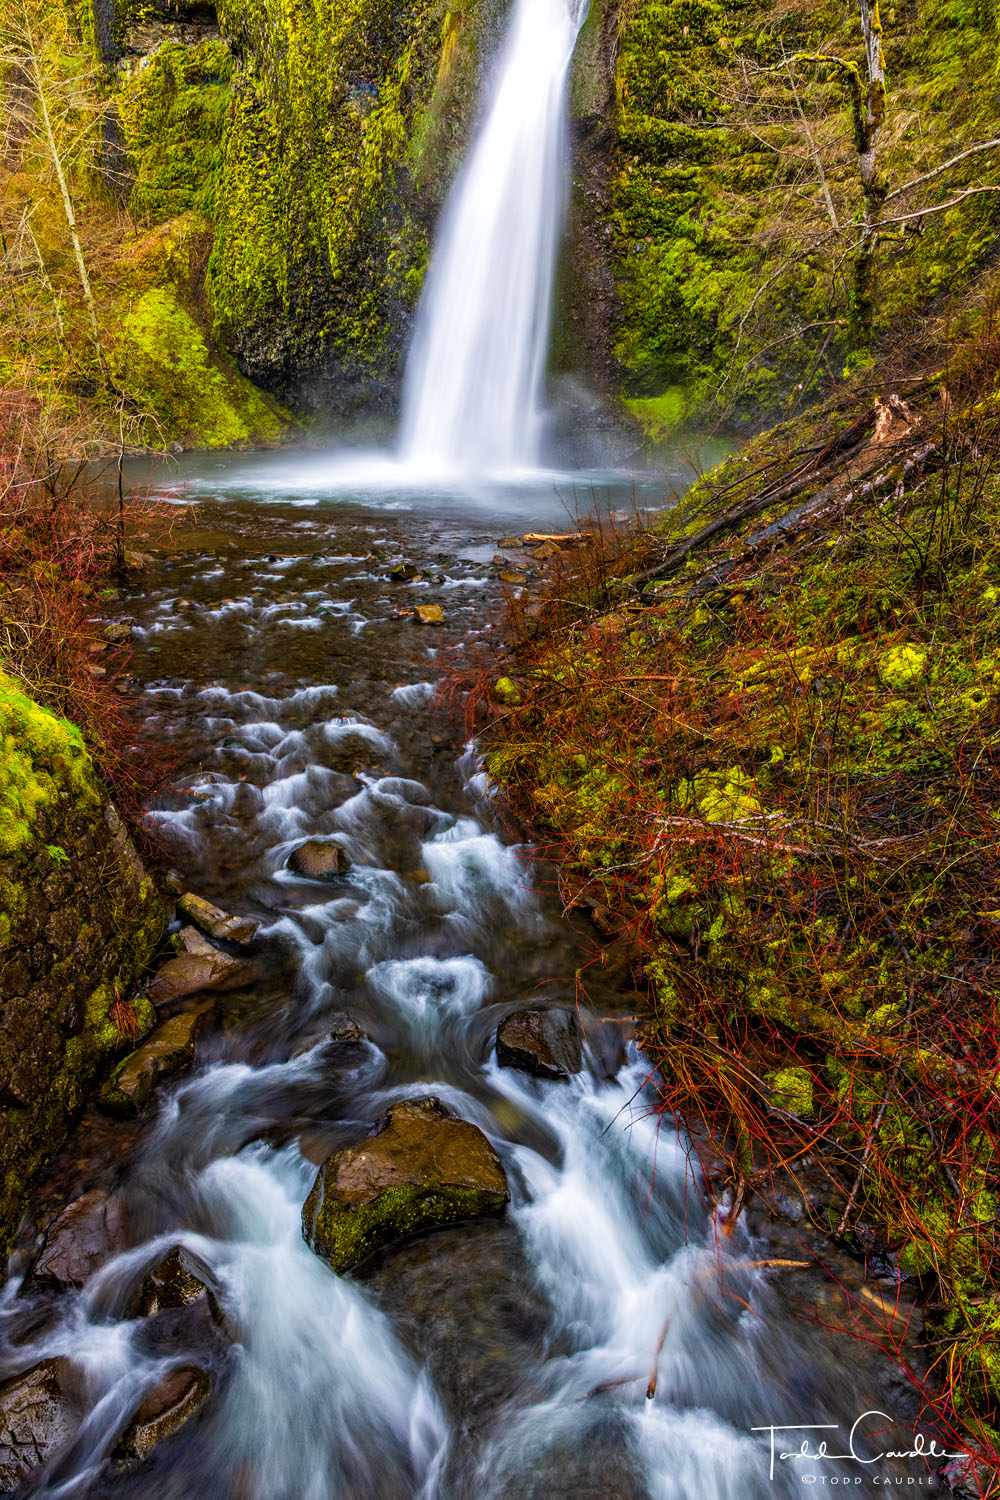 Aptly named Horsetail Falls is a beautiful roadside attraction along the Columbia Gorge Scenic Highway in Oregon.